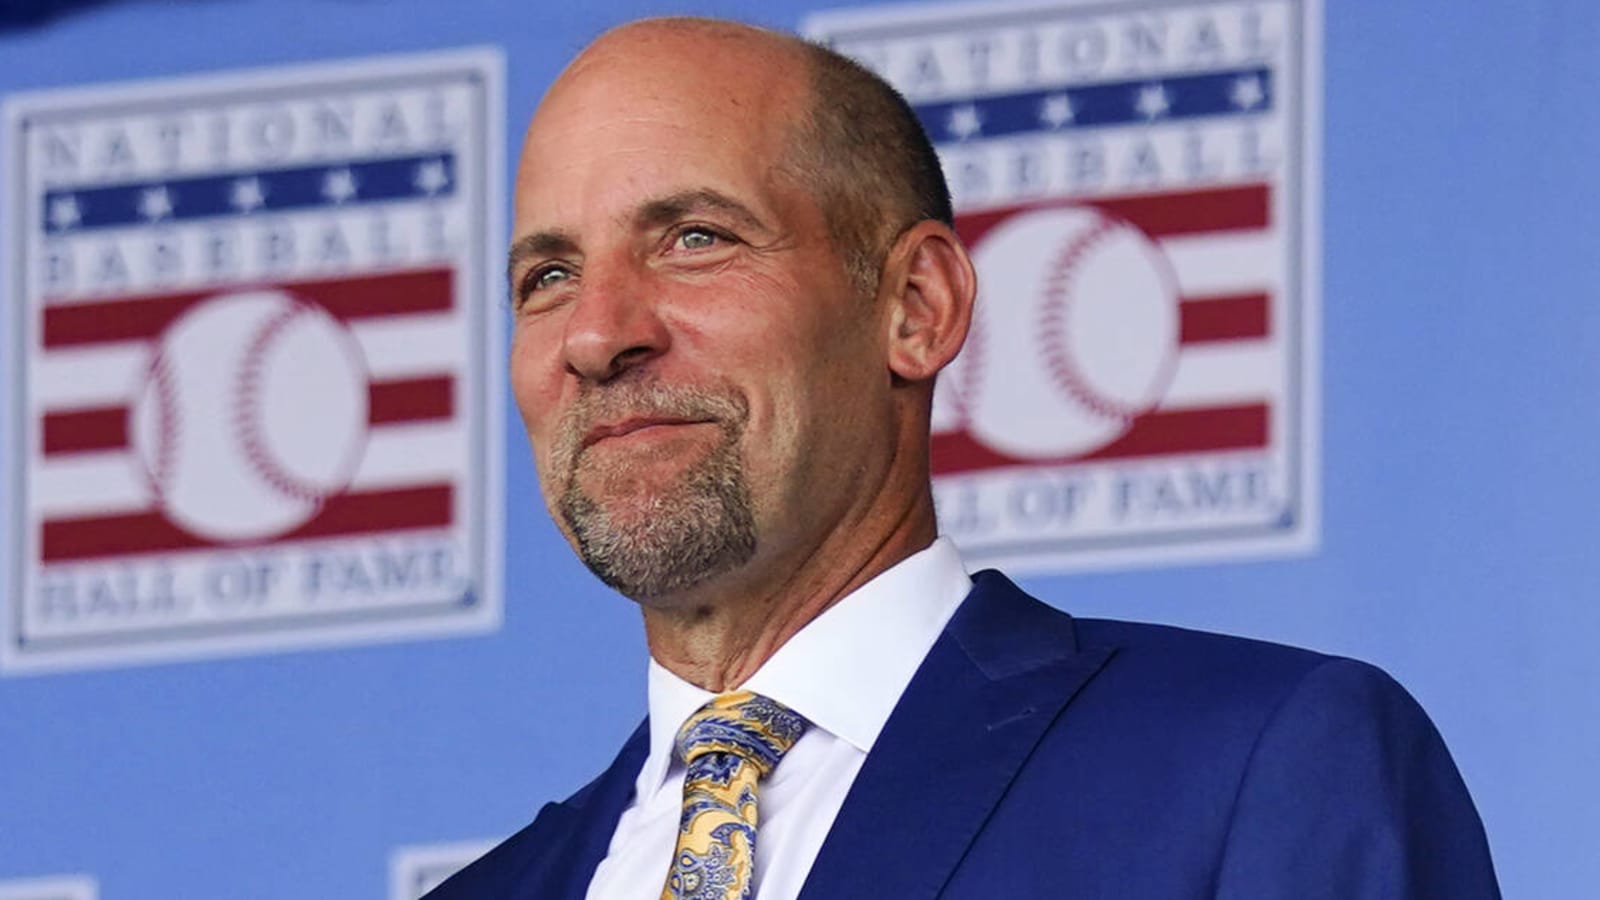 Smoltz worked 'Field of Dreams Game' same day father died